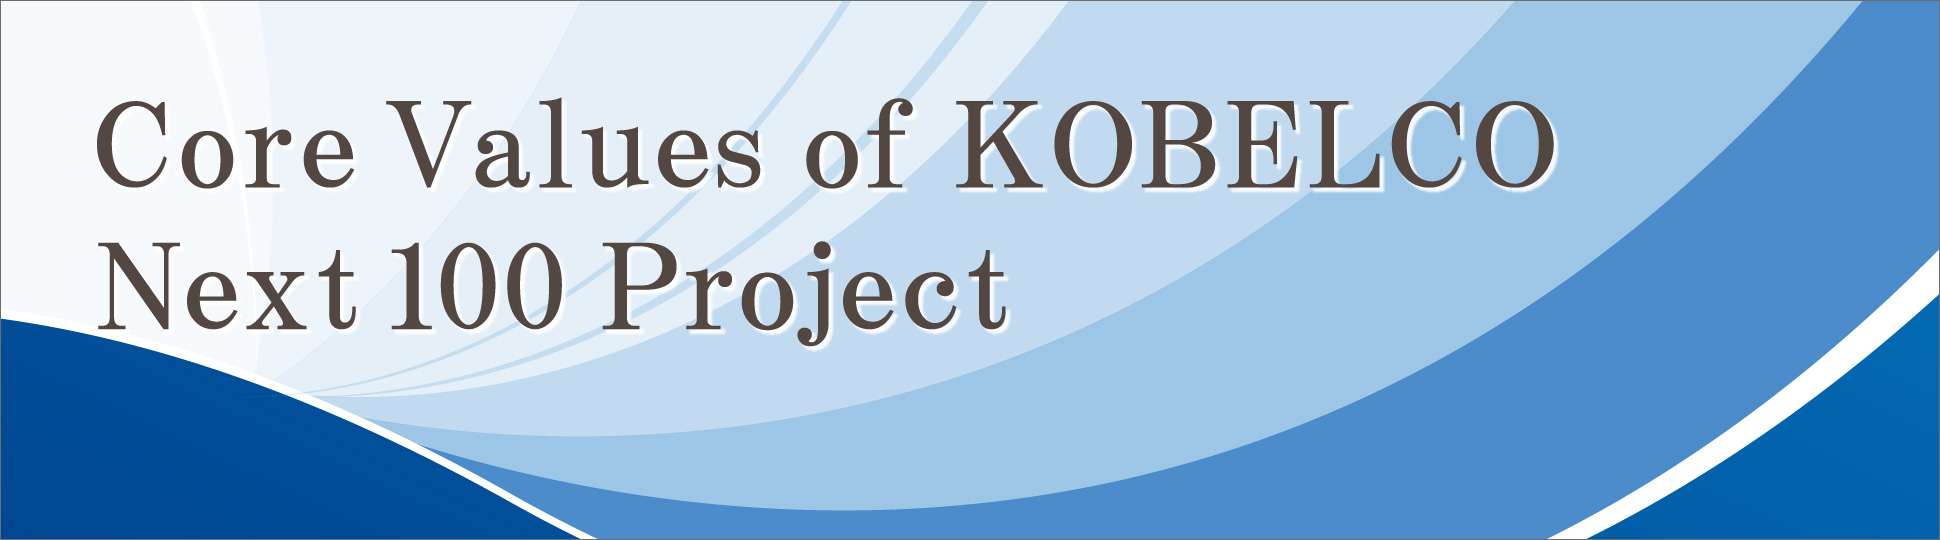 Core Values of KOBELCO Next 100 Project